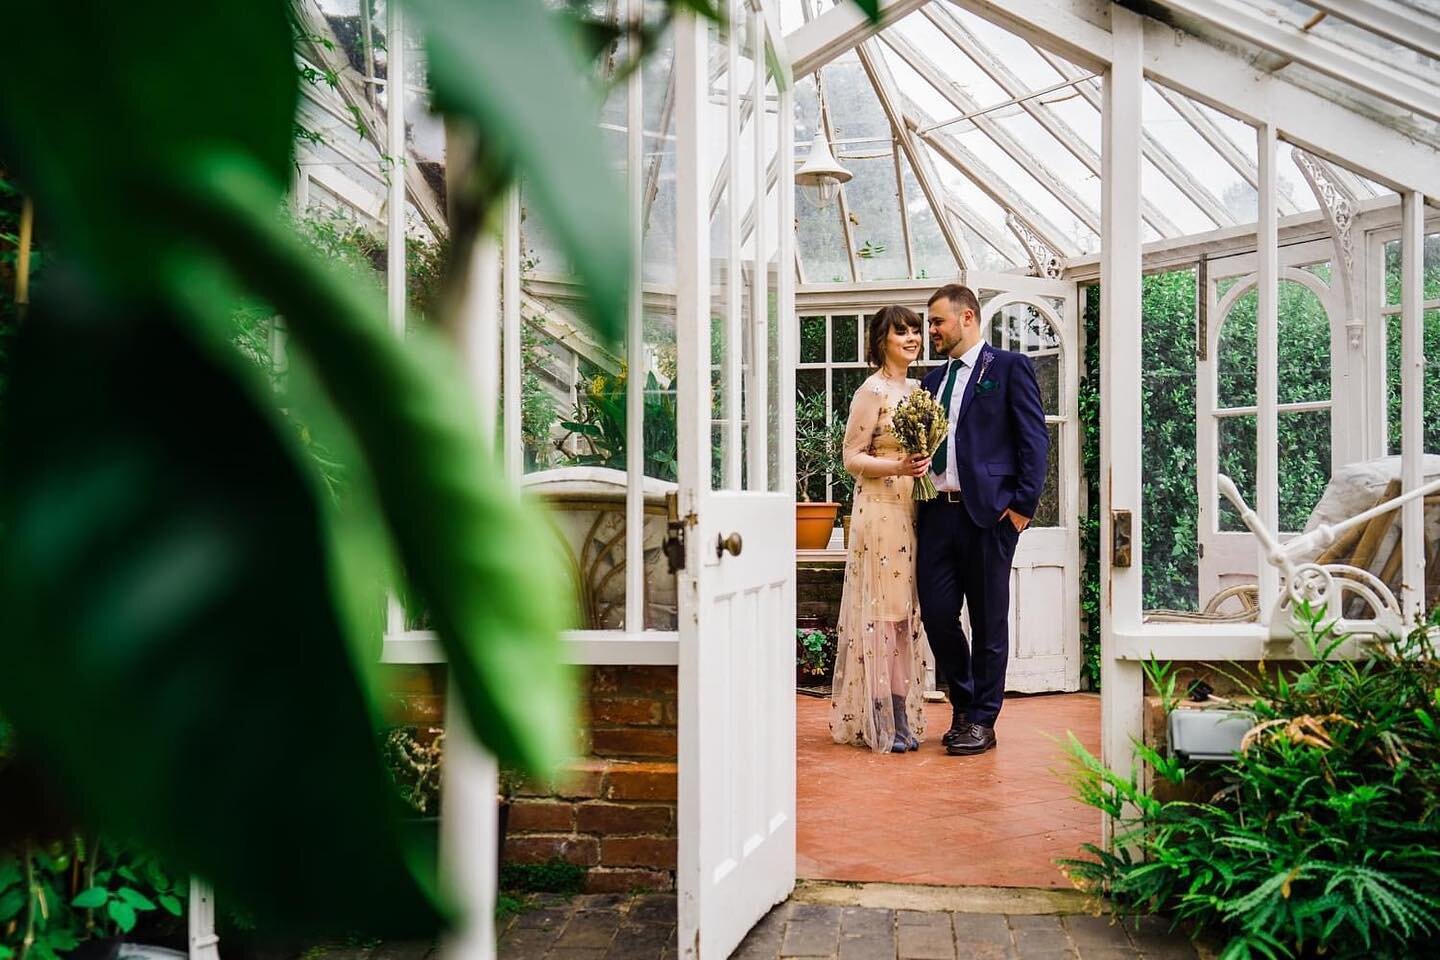 We told you that there are lots of photo opps here @yeldersleyhall 

Fancy seeing them for yourself? Then book onto our viewing event on Sunday 14th May 11-3:30pm. You can book slots between 
11.00-1:00pm and 1:30-3:30pm

Drop us an email on info@yel